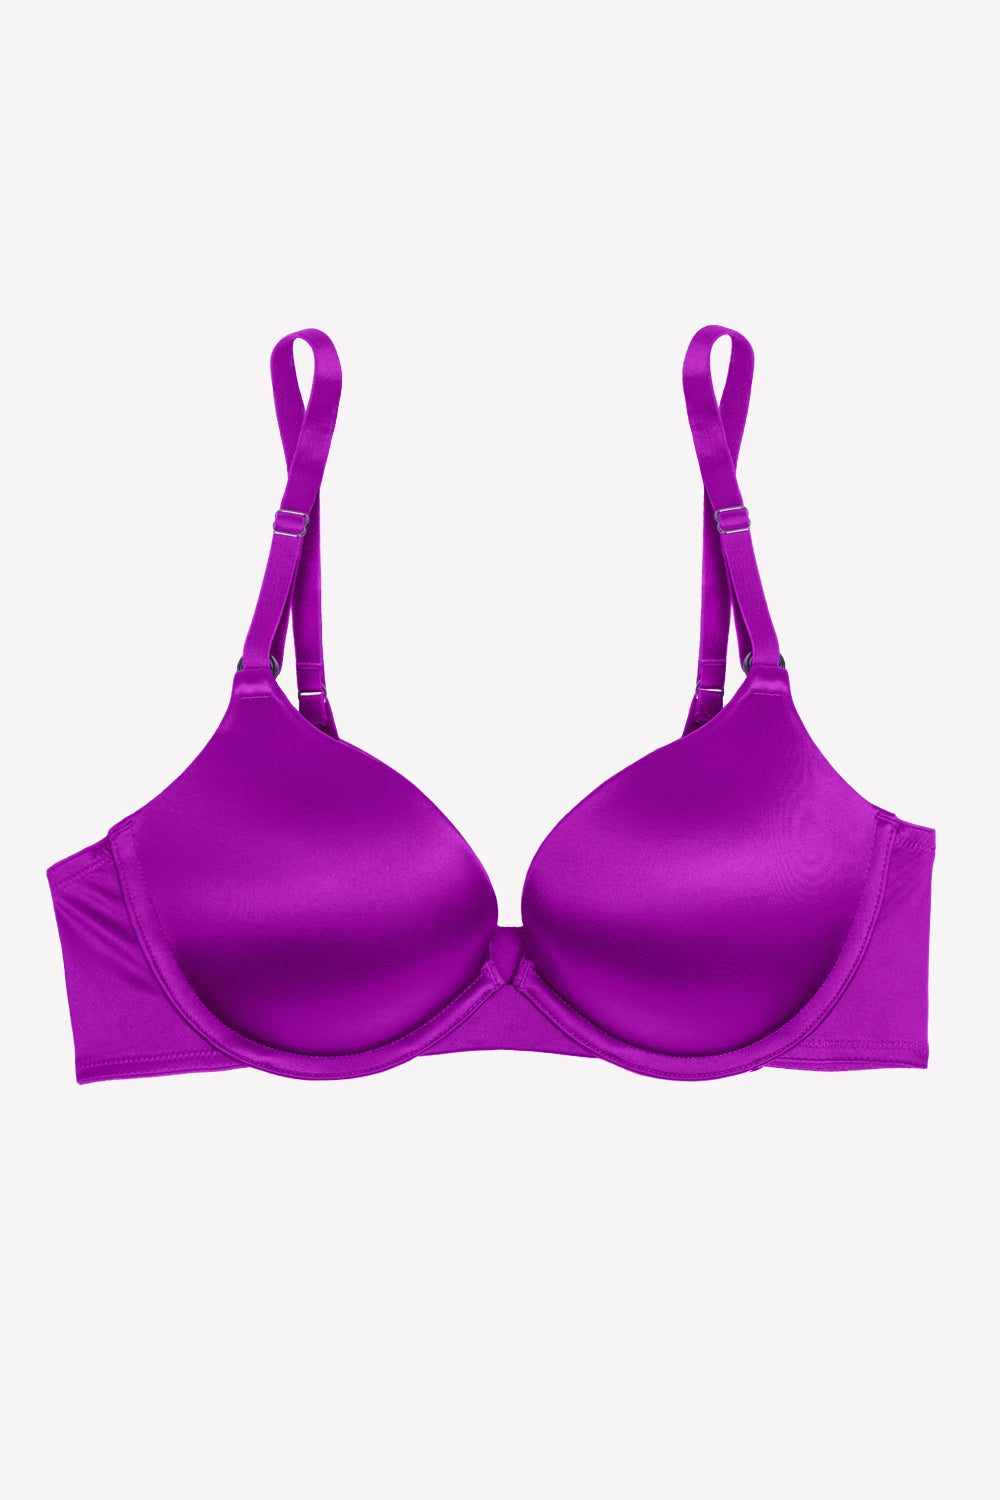 Buy online Purple Heavily Padded Push Up Bra from lingerie for Women by  Prettycat for ₹409 at 55% off